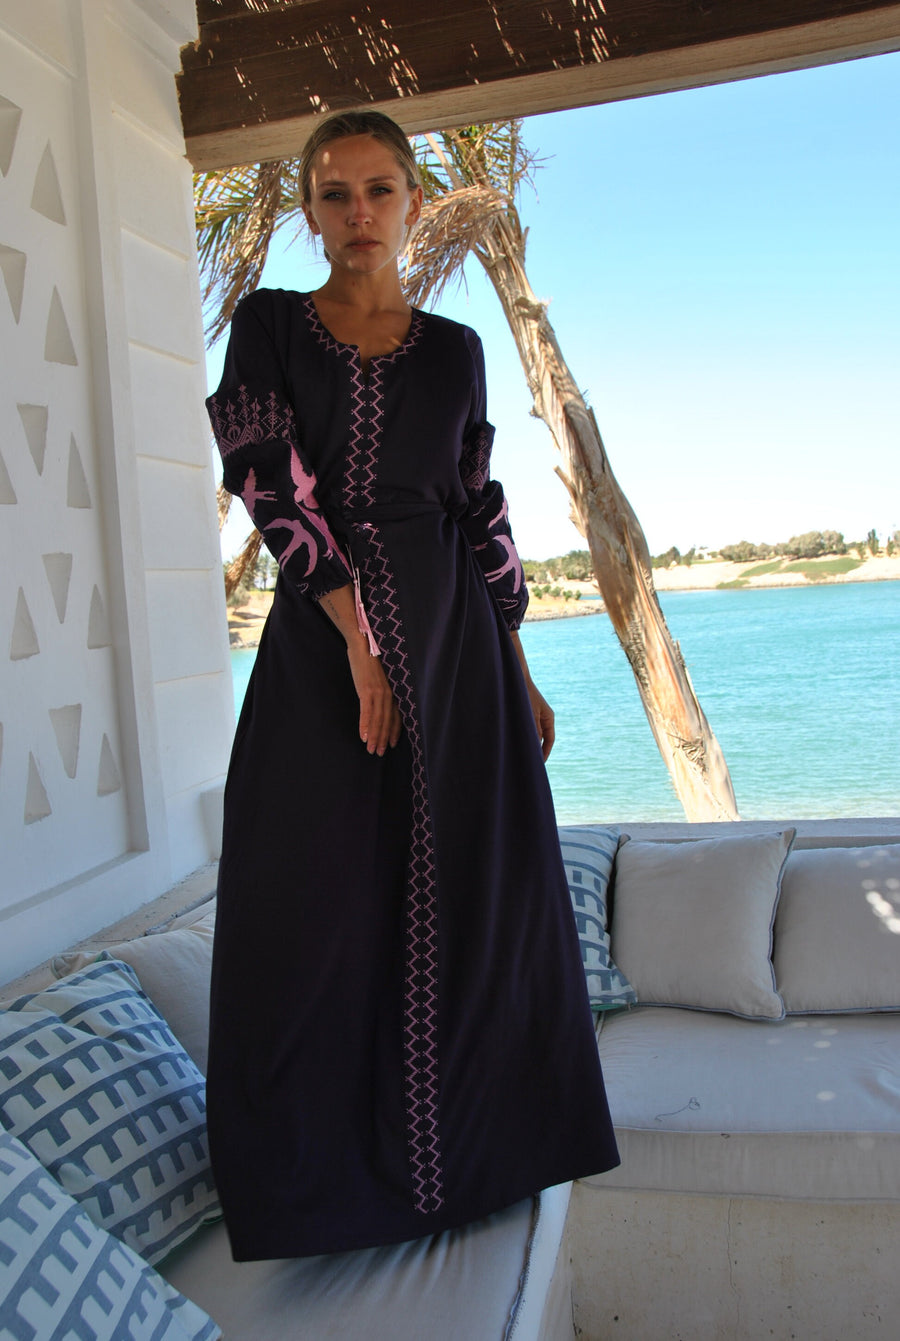 Purple Cotton Caftan with belt, birds embroidery, caftans for women, embroidered Caftan dress, Caftan maxi dress, Caftans for women, Caftans